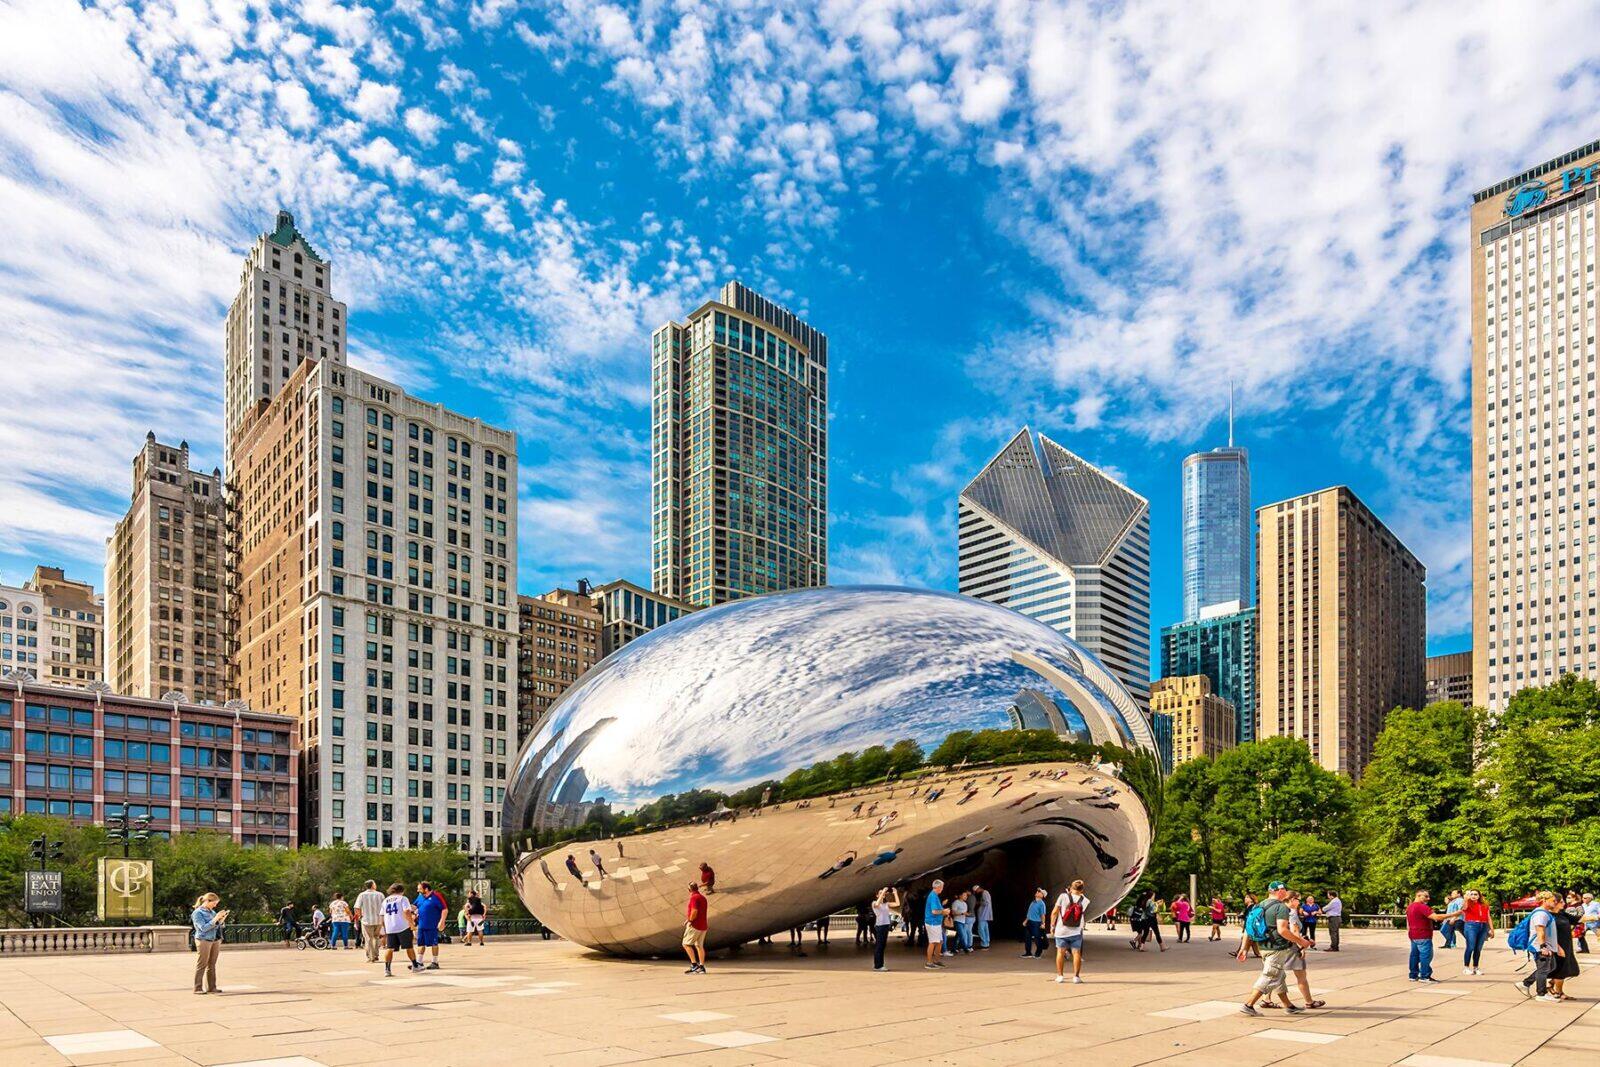 safest places to visit in chicago